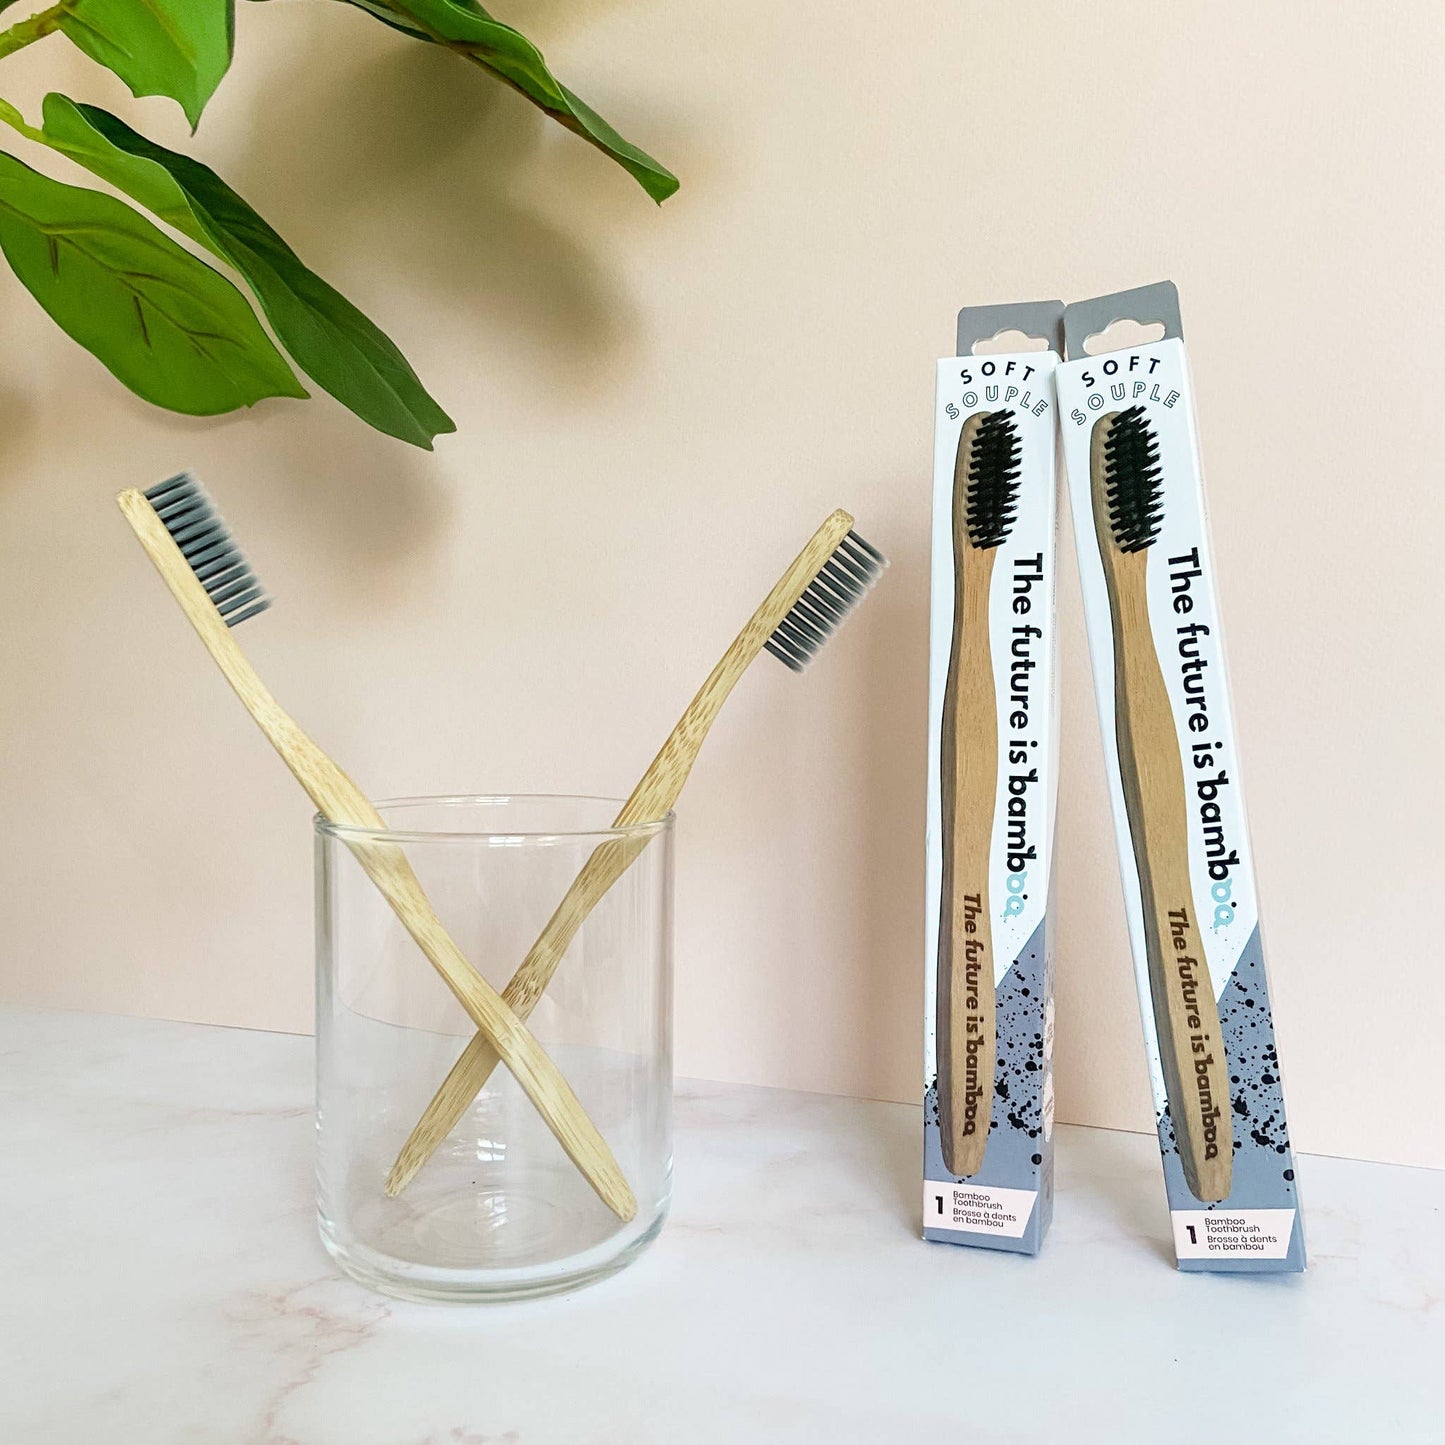 Adult Soft Bamboo Toothbrushes - Charcoal